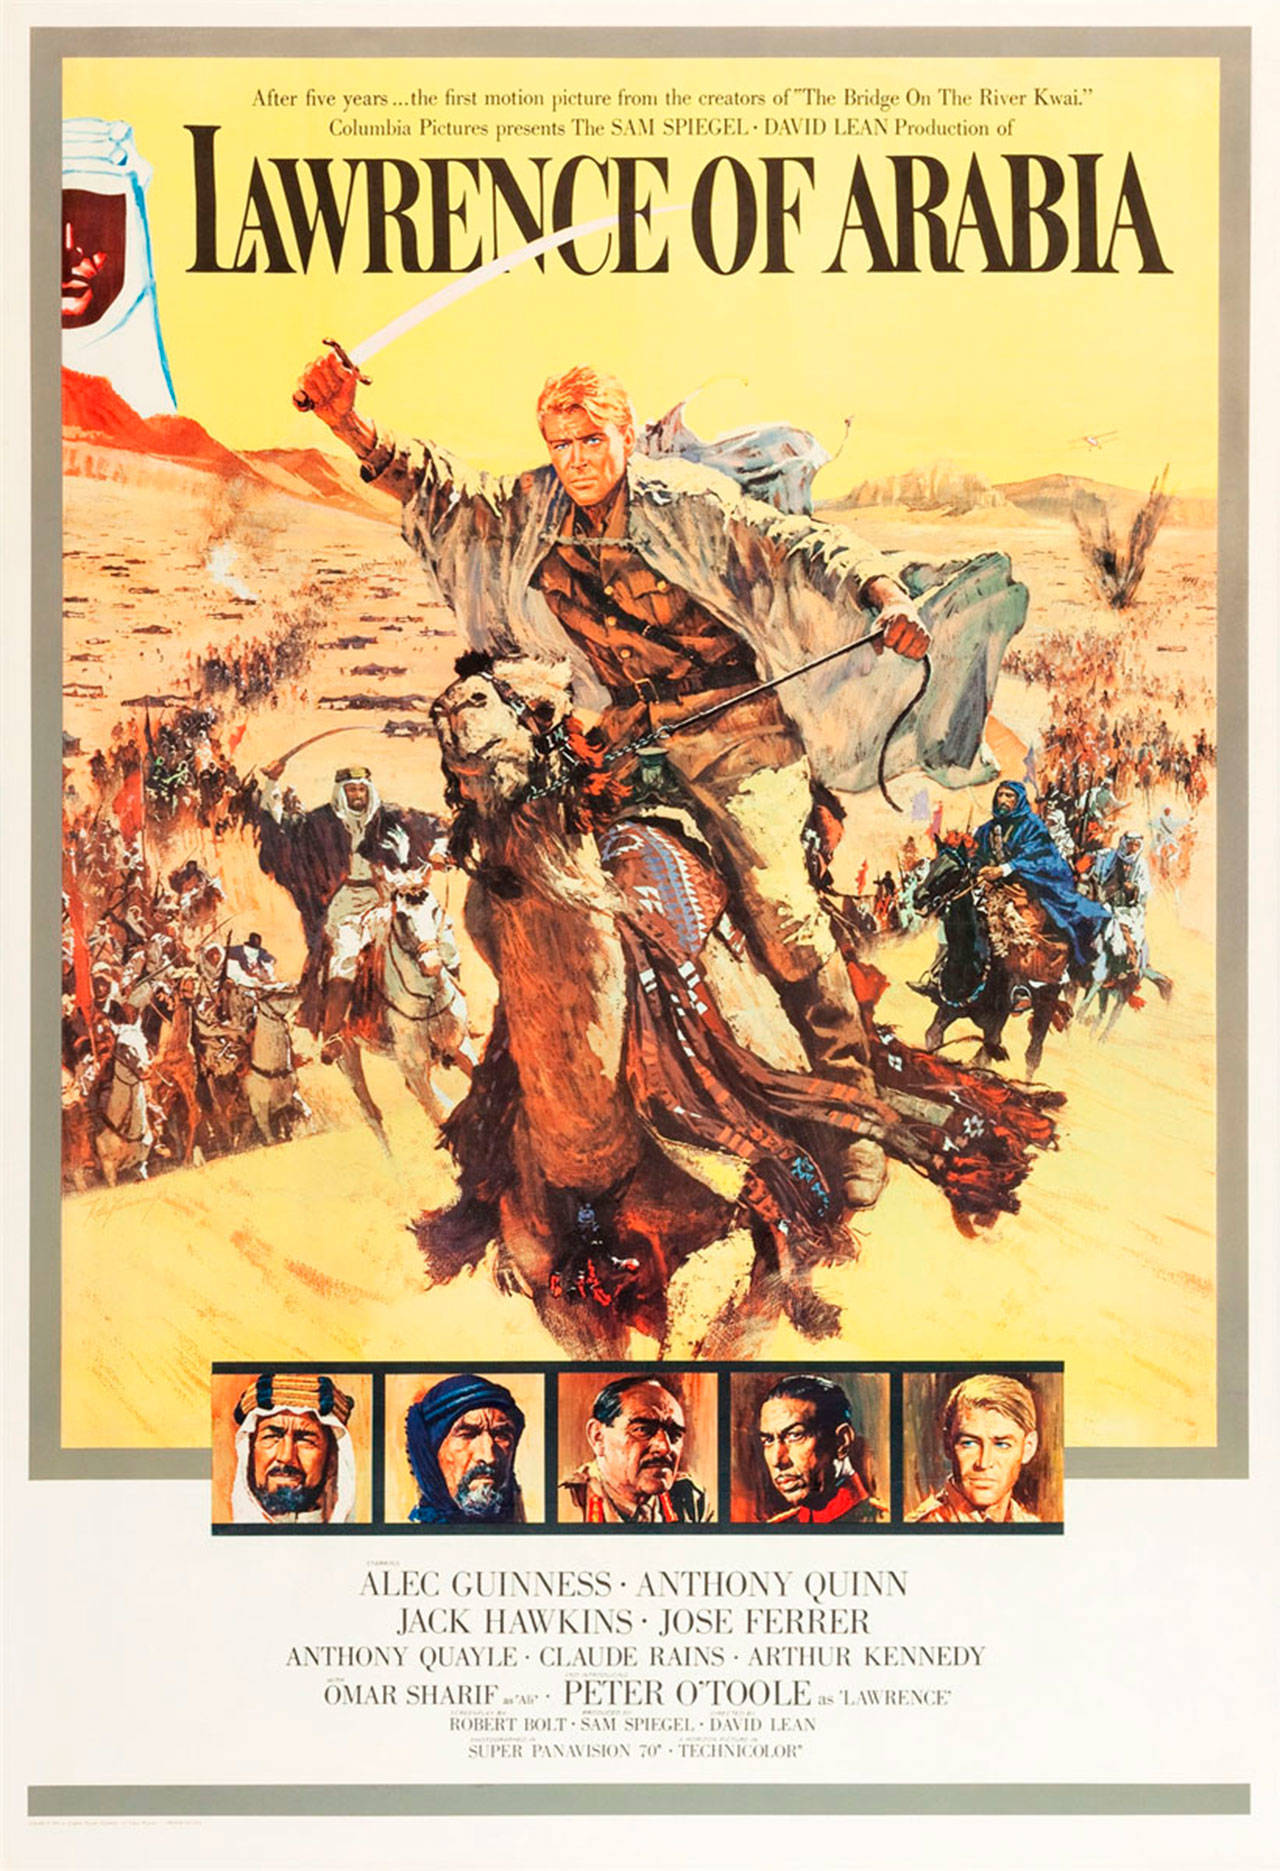 Image courtesy of Columbia Pictures | The 1962 British epic historical drama “Lawrence of Arabia” will return to the big screen at Bainbridge Cinemas for a special revival screening, presented by Turner Classic Movies, at 6 p.m. Wednesday, Sept. 4.